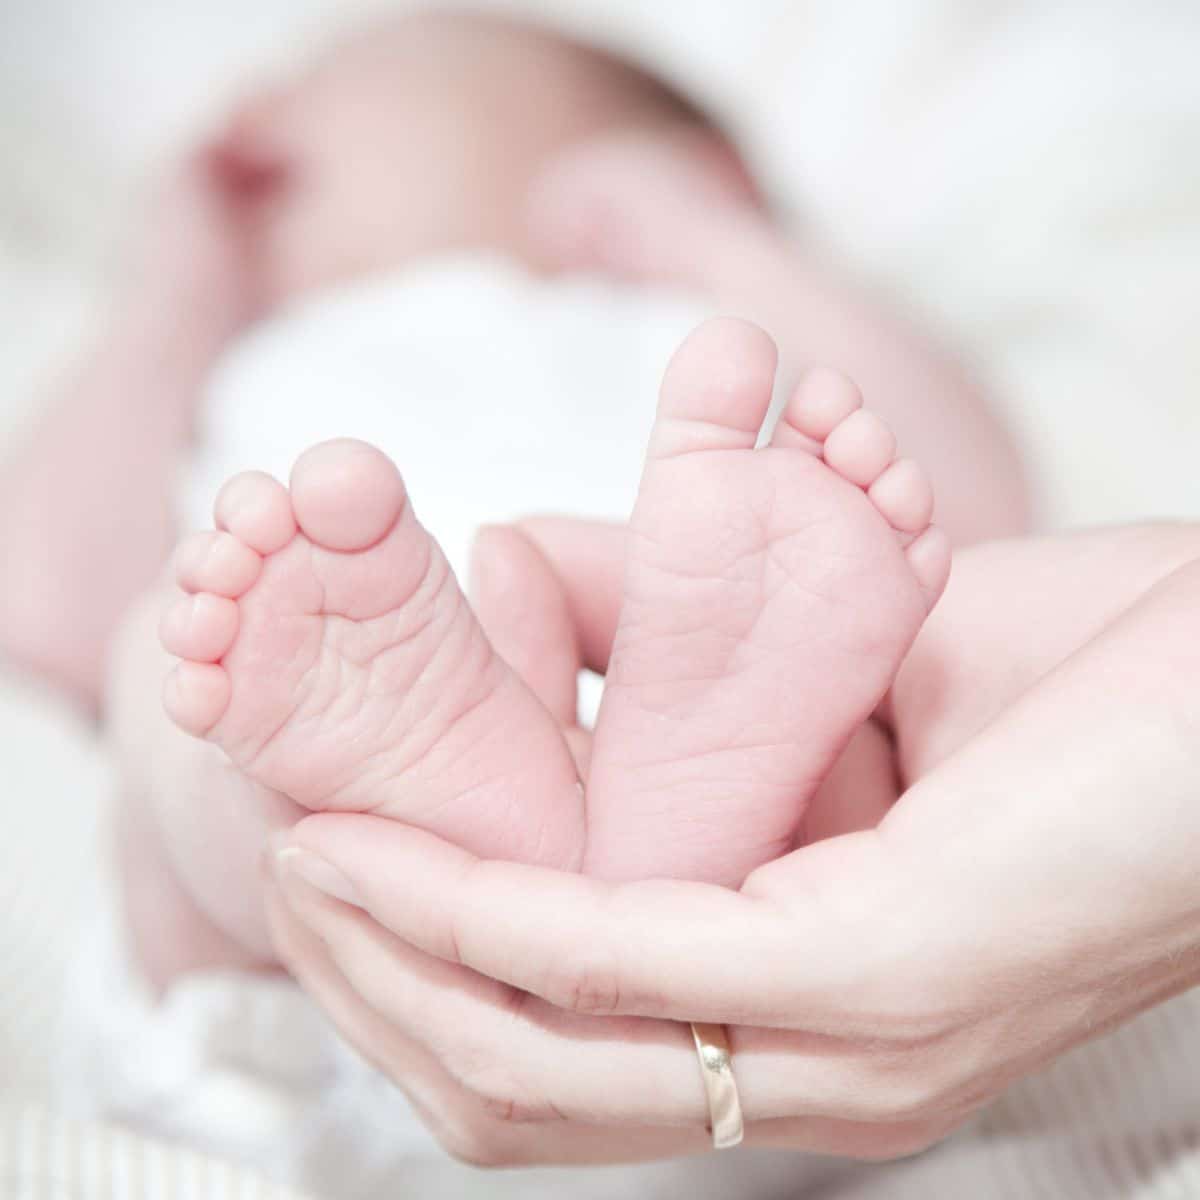 Woman holding up baby feet while baby is sleeping